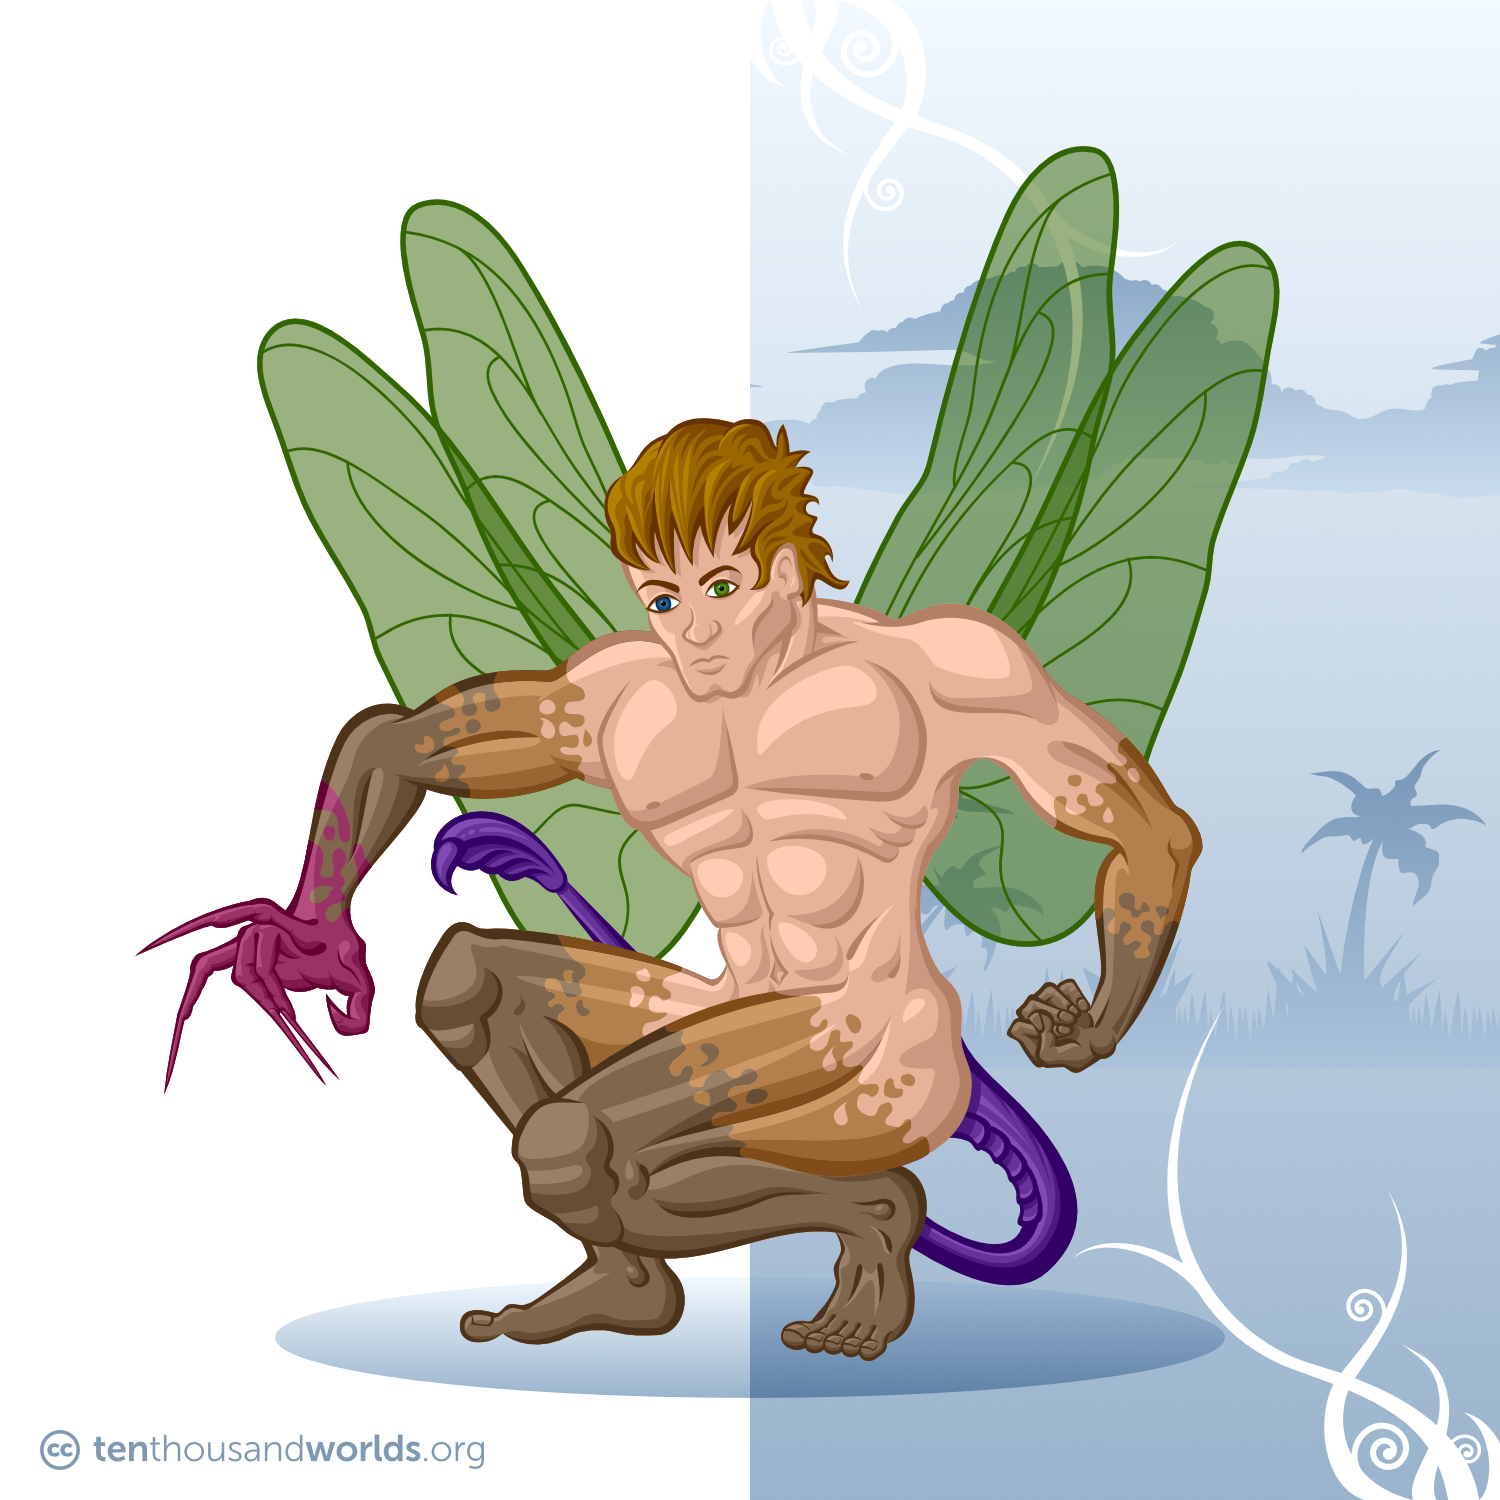 A crouching human-like figure covered in changing skin tones, sprouting translucent green wings, a violet scorpion tail, long scarlet claws growing from the left hand, and mismatched eyes.